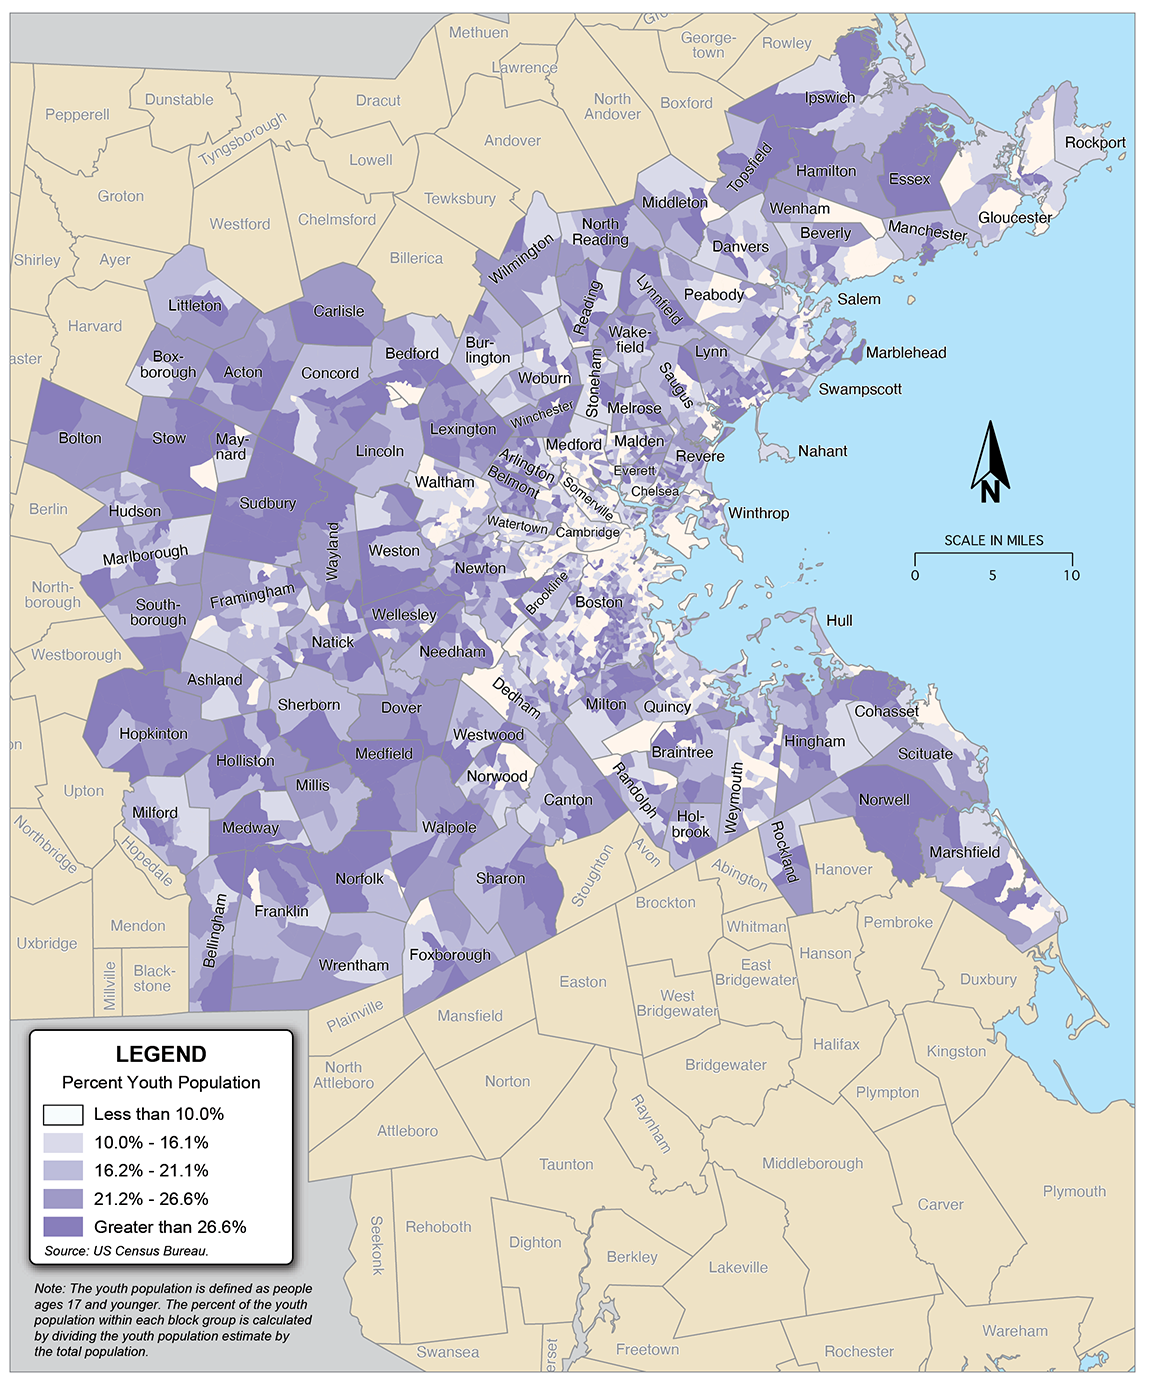 Figure 6-7 is a map showing the percent of the population that is age 17 or younger in each block group across the 97 communities in the Boston region.